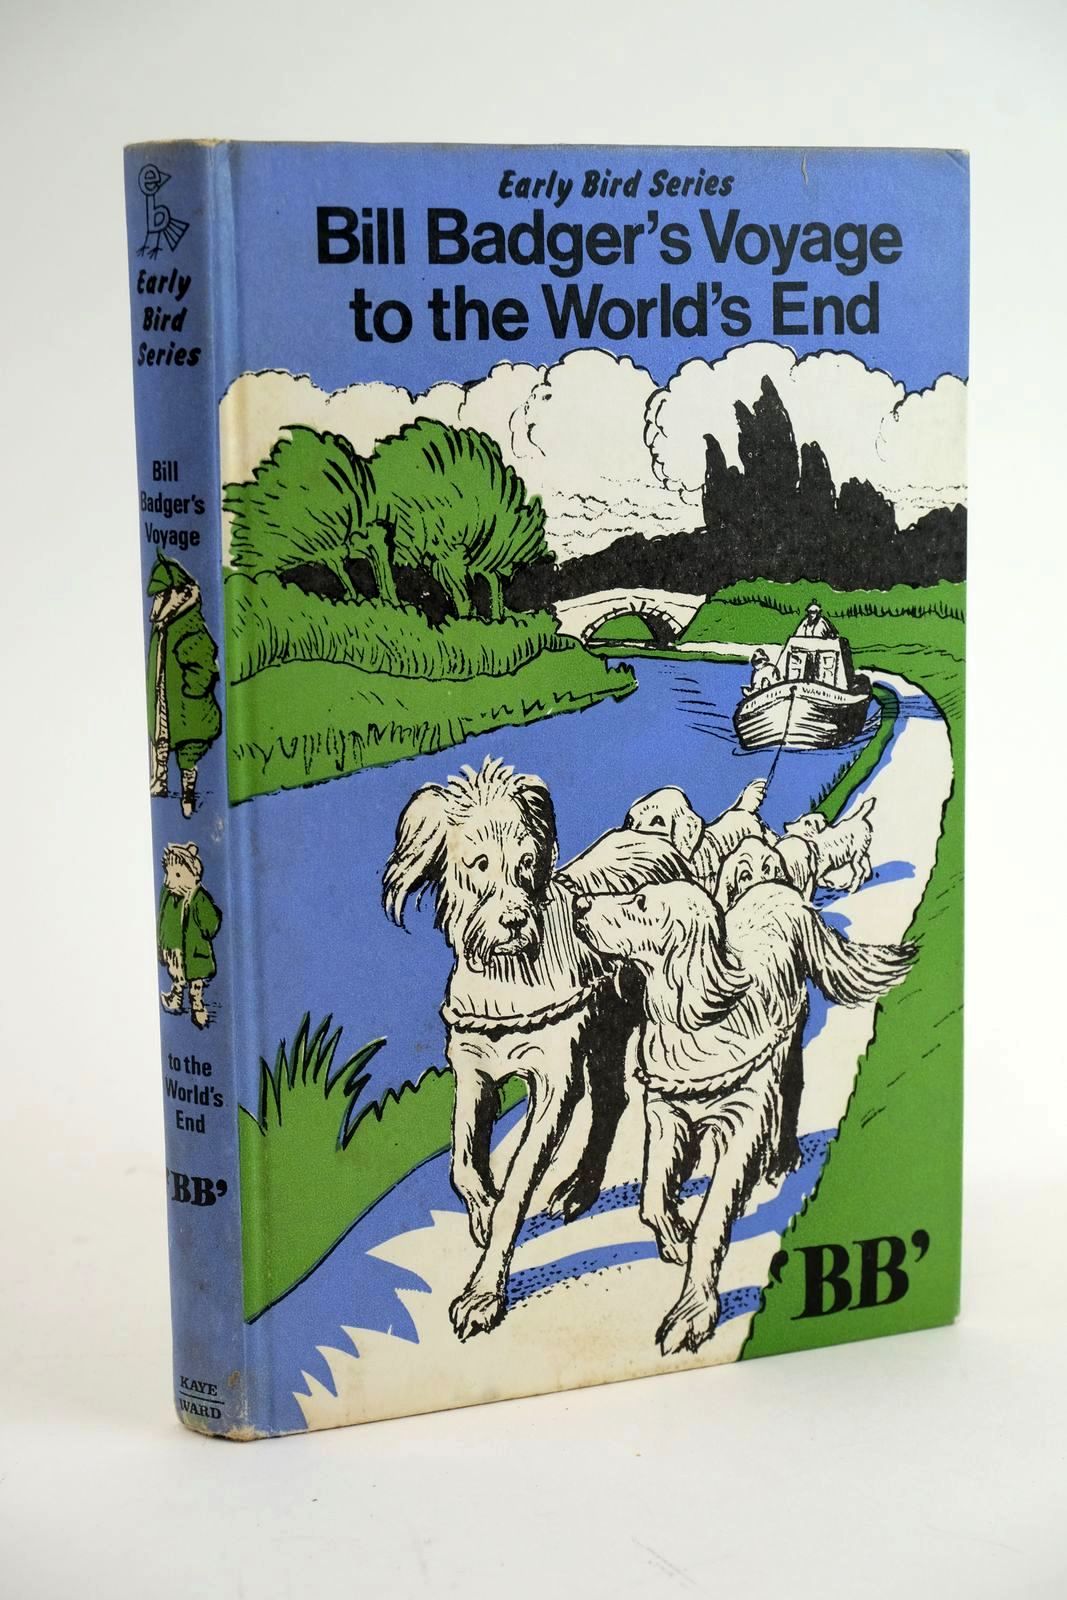 Photo of BILL BADGER'S VOYAGE TO THE WORLD'S END written by BB, illustrated by BB, published by Kaye & Ward Ltd. (STOCK CODE: 1323395)  for sale by Stella & Rose's Books